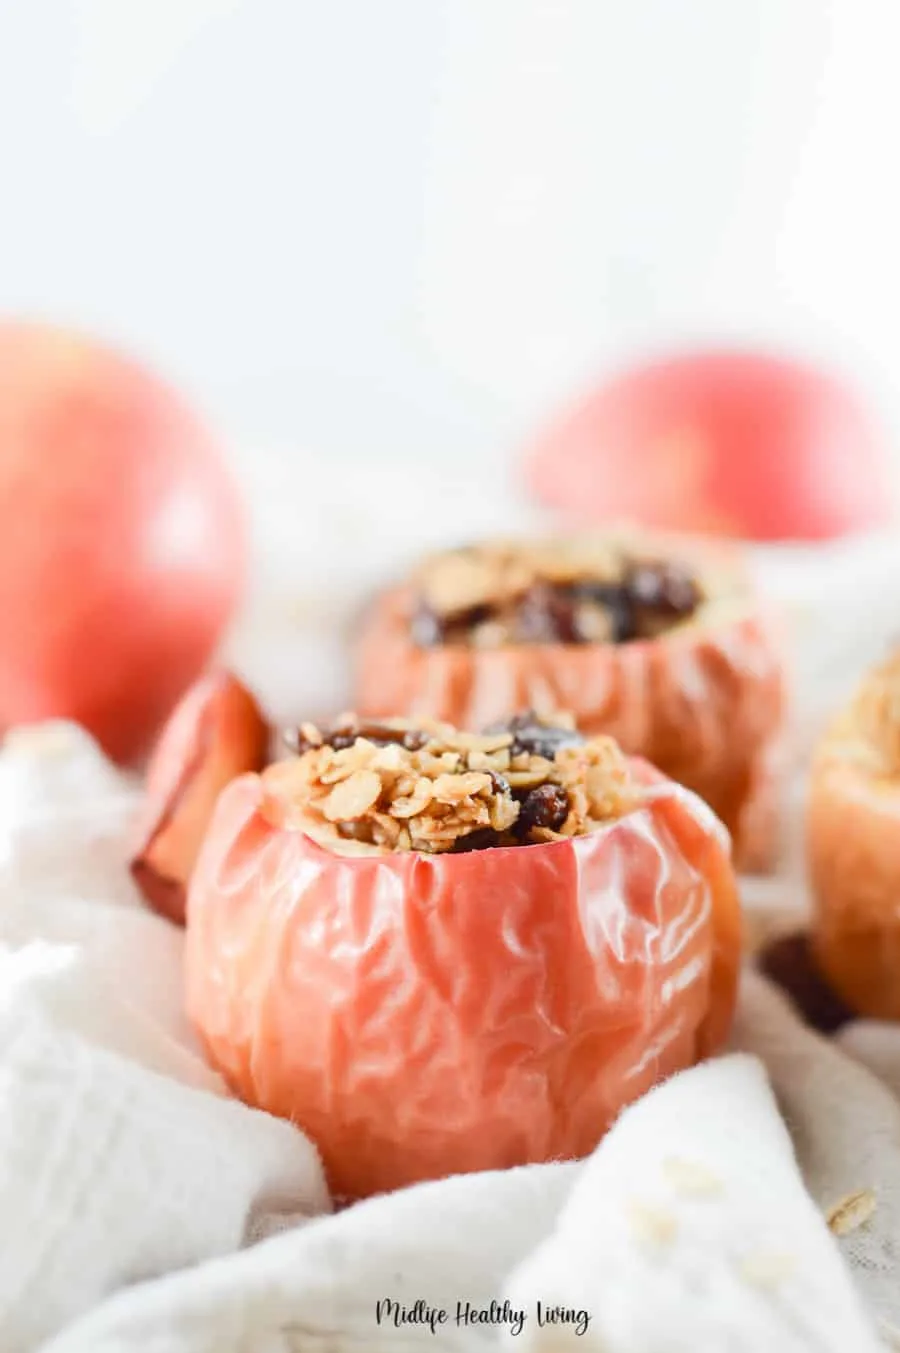 A delicious view of the finished baked apples for Weight Watchers. 